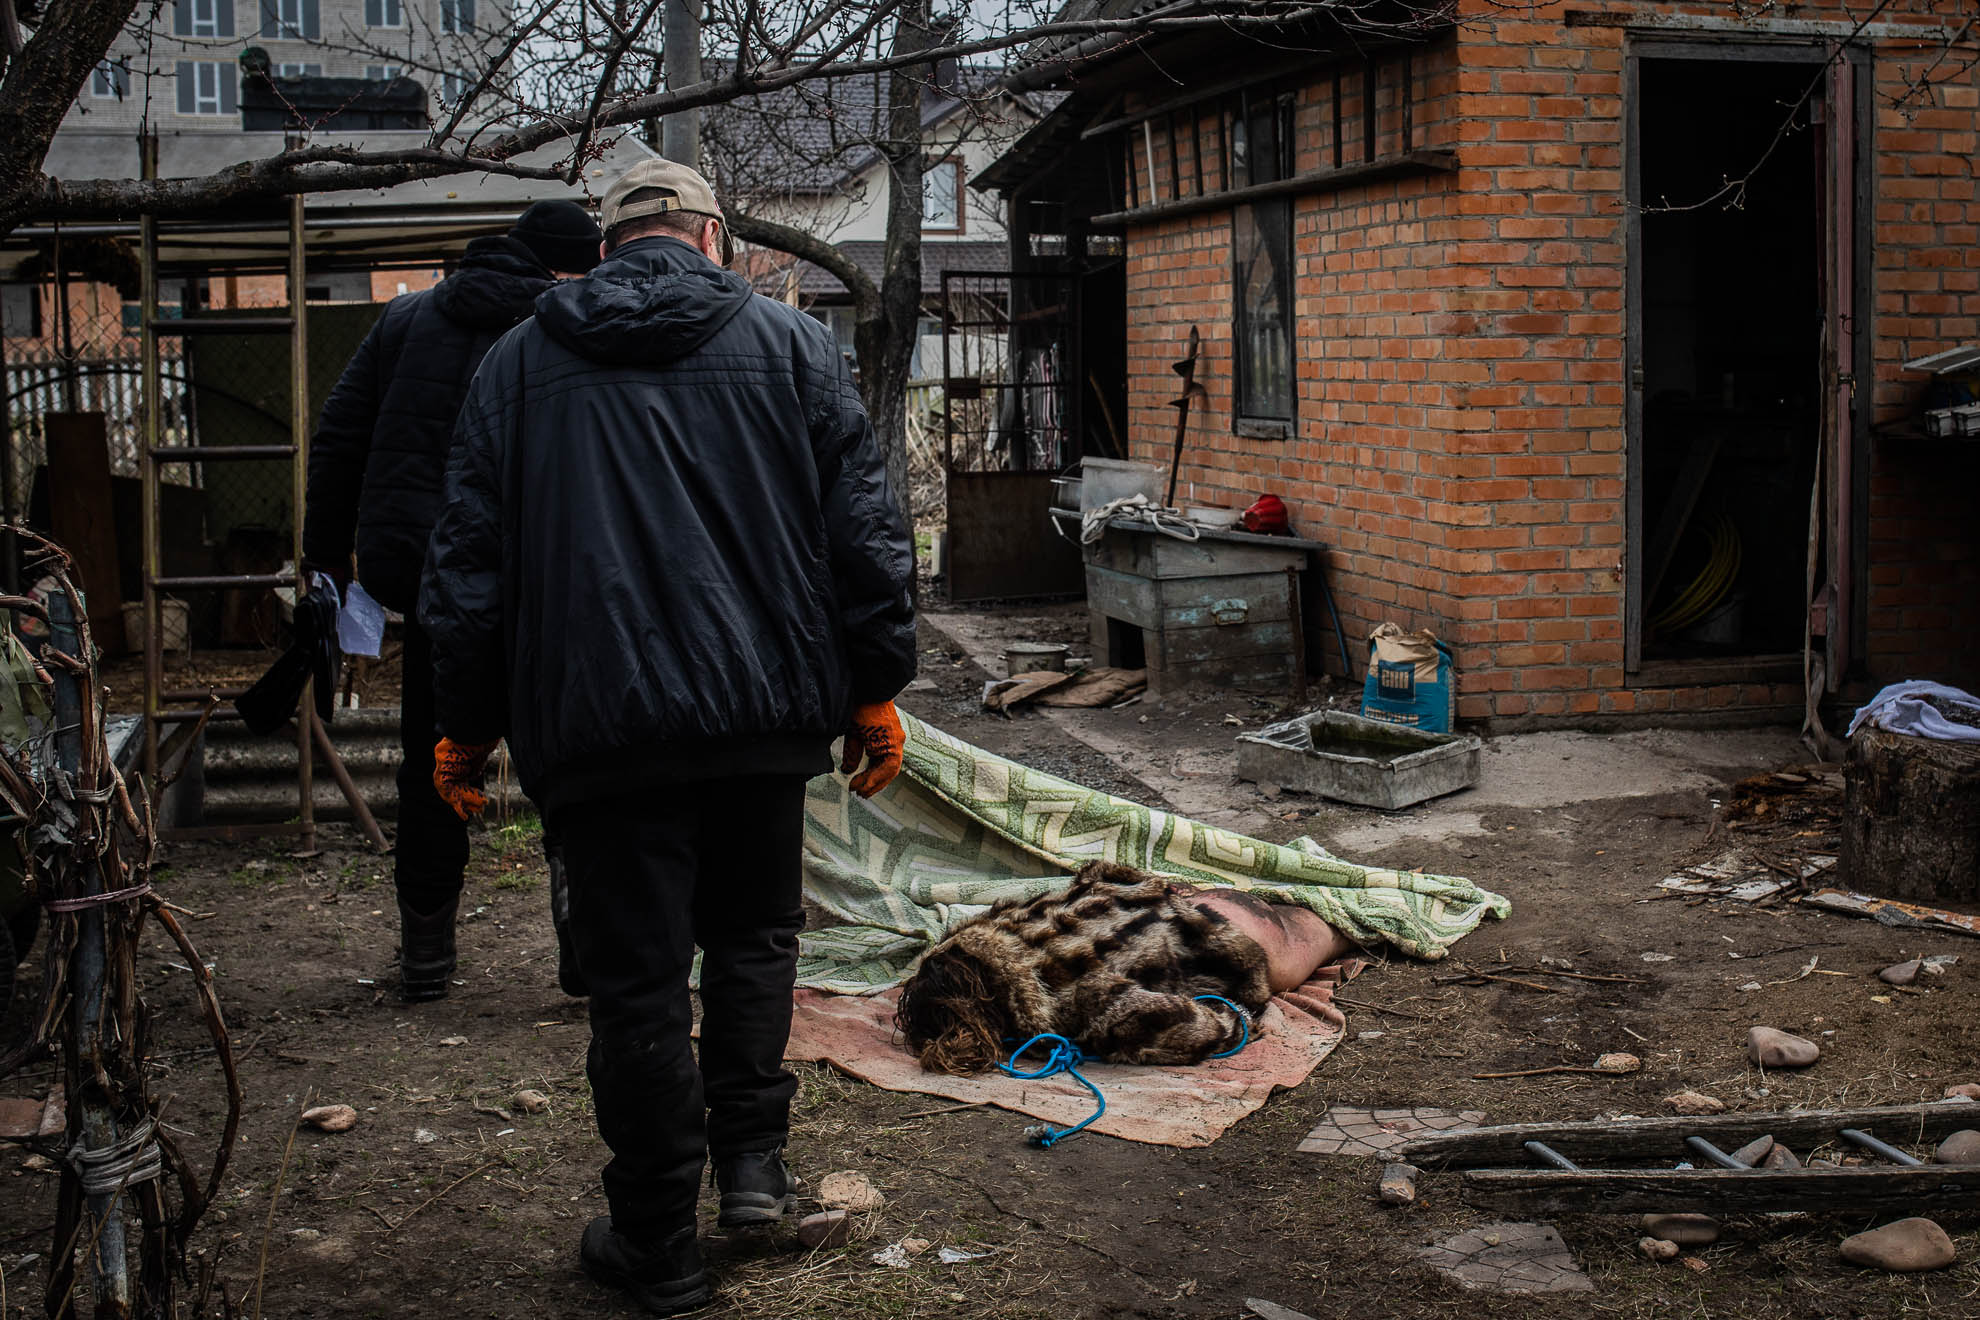 The body of a woman in her 30s was found half-naked - she was wearing only a fur coat - in the basement of a house on Vokzalna Street, which had been occupied by Russian troops. Police searched the body, which was collected on April 8. The body had wounds and burns on her legs. They said that the woman did not reside in the house where she was found and that her identity was not yet known.